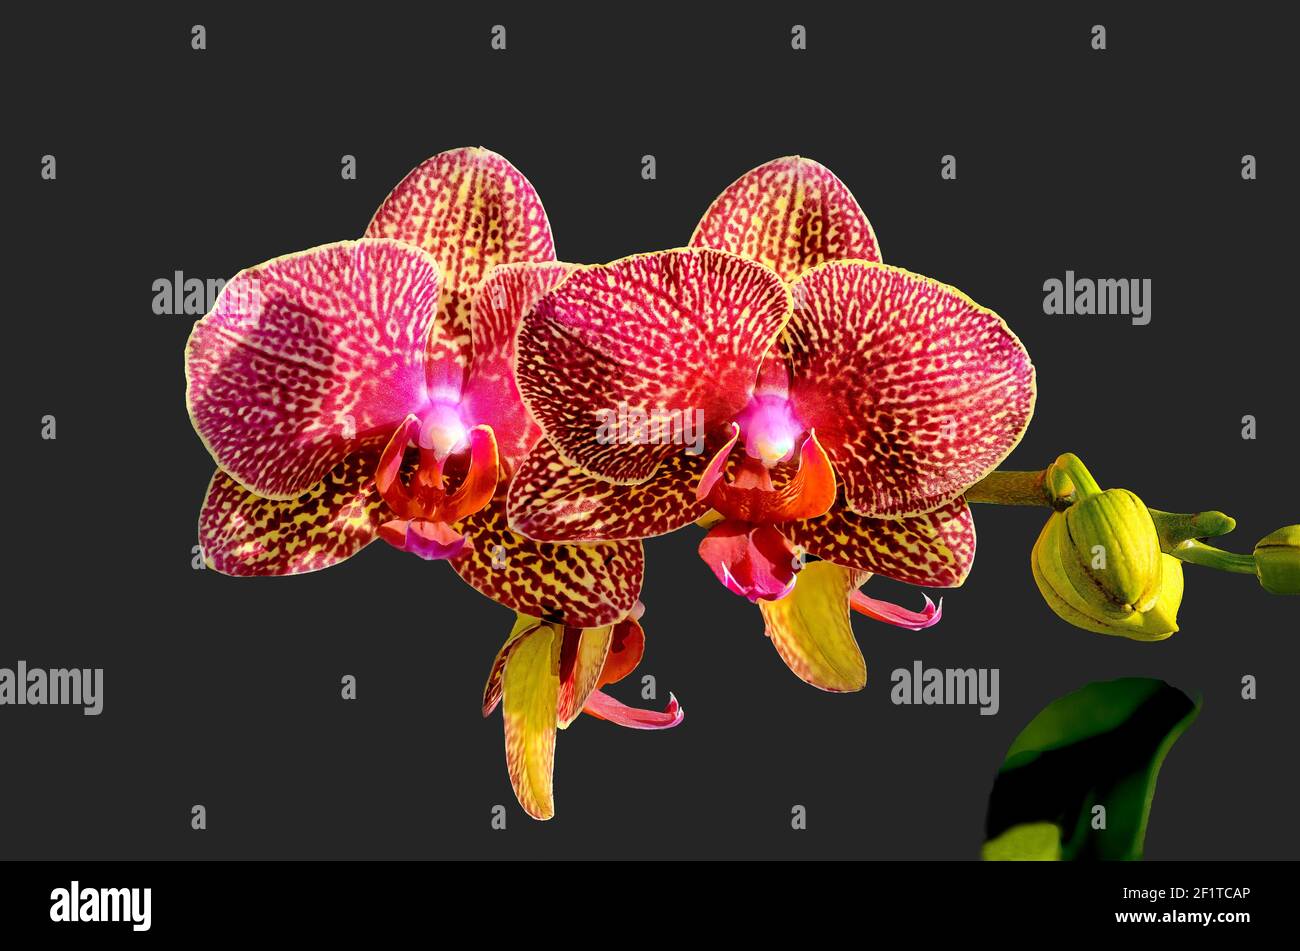 Blooming cluster of Phalaenopsis Orchids also known as Moth Orchids Stock Photo